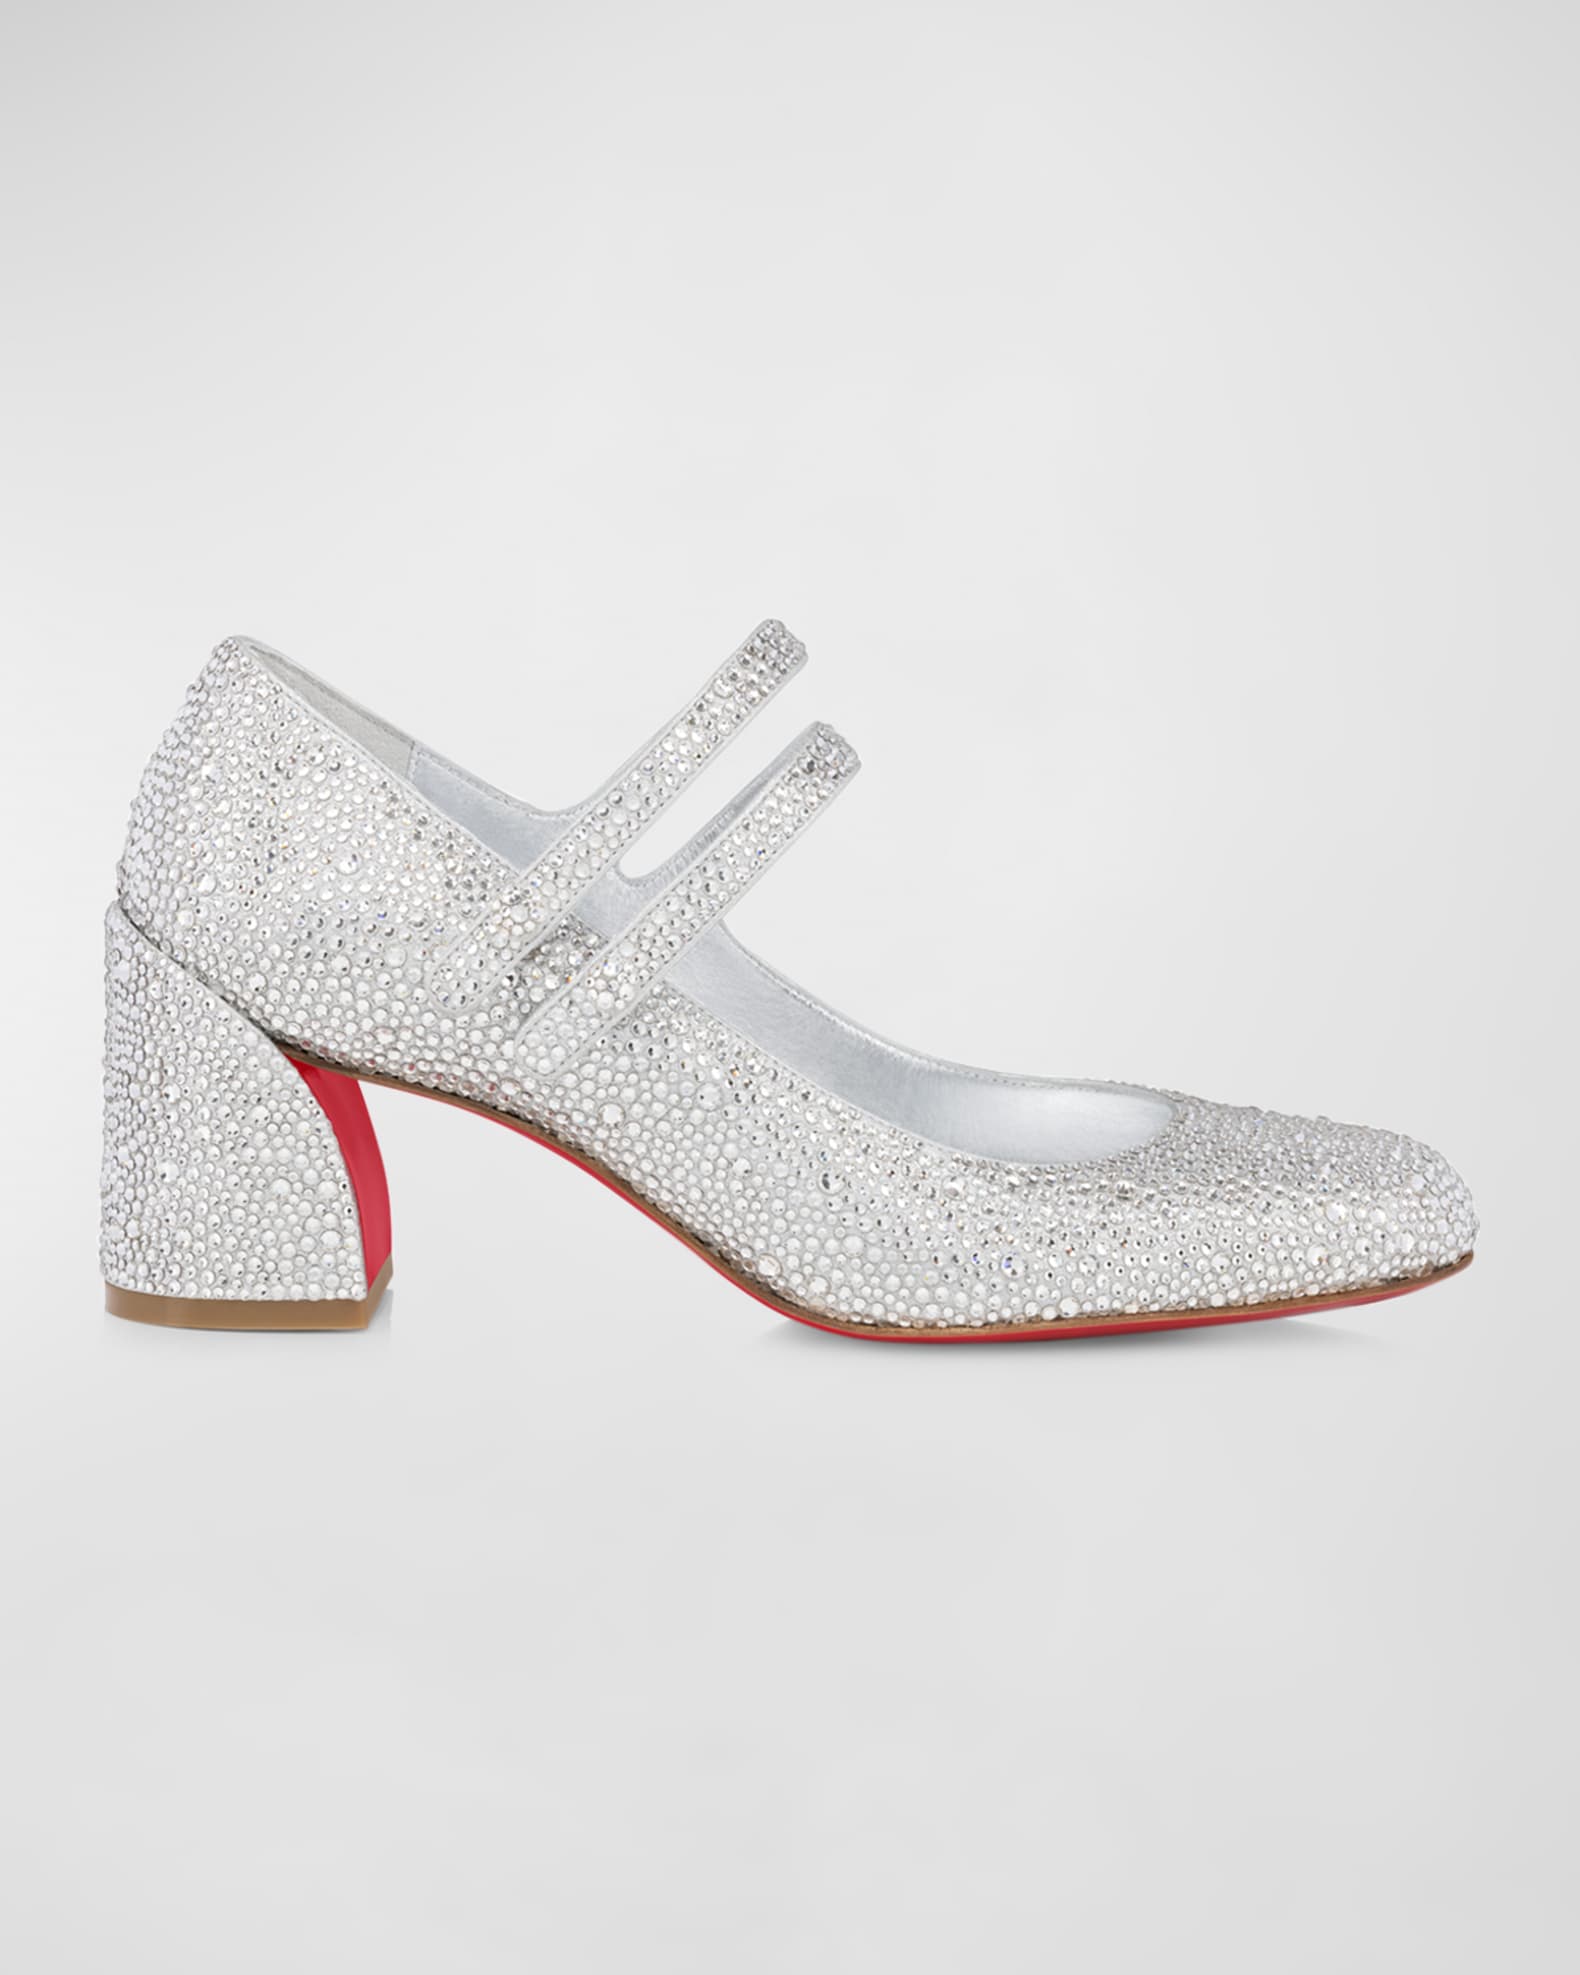 Crystal Clear Red Bottom Flats Protectors Louboutin Soles 